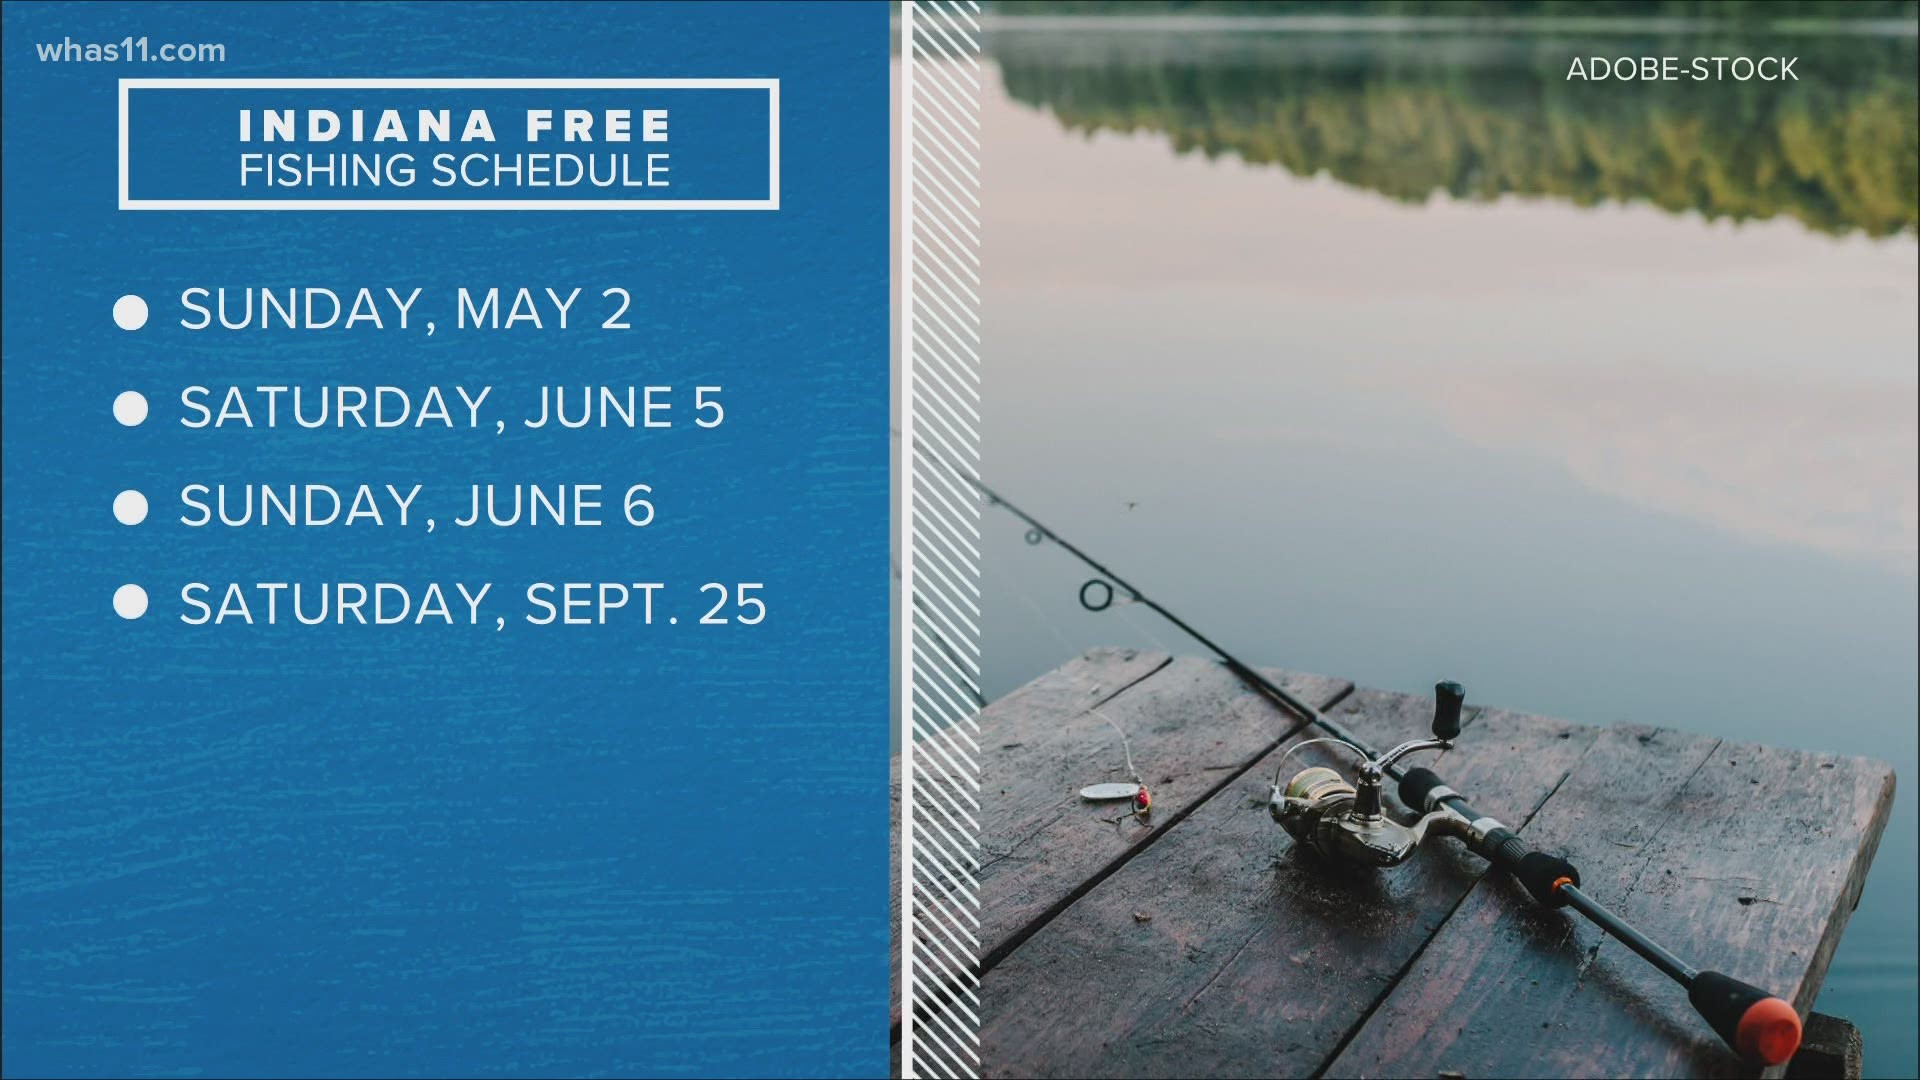 Indiana DNR announces 4 free fishing days